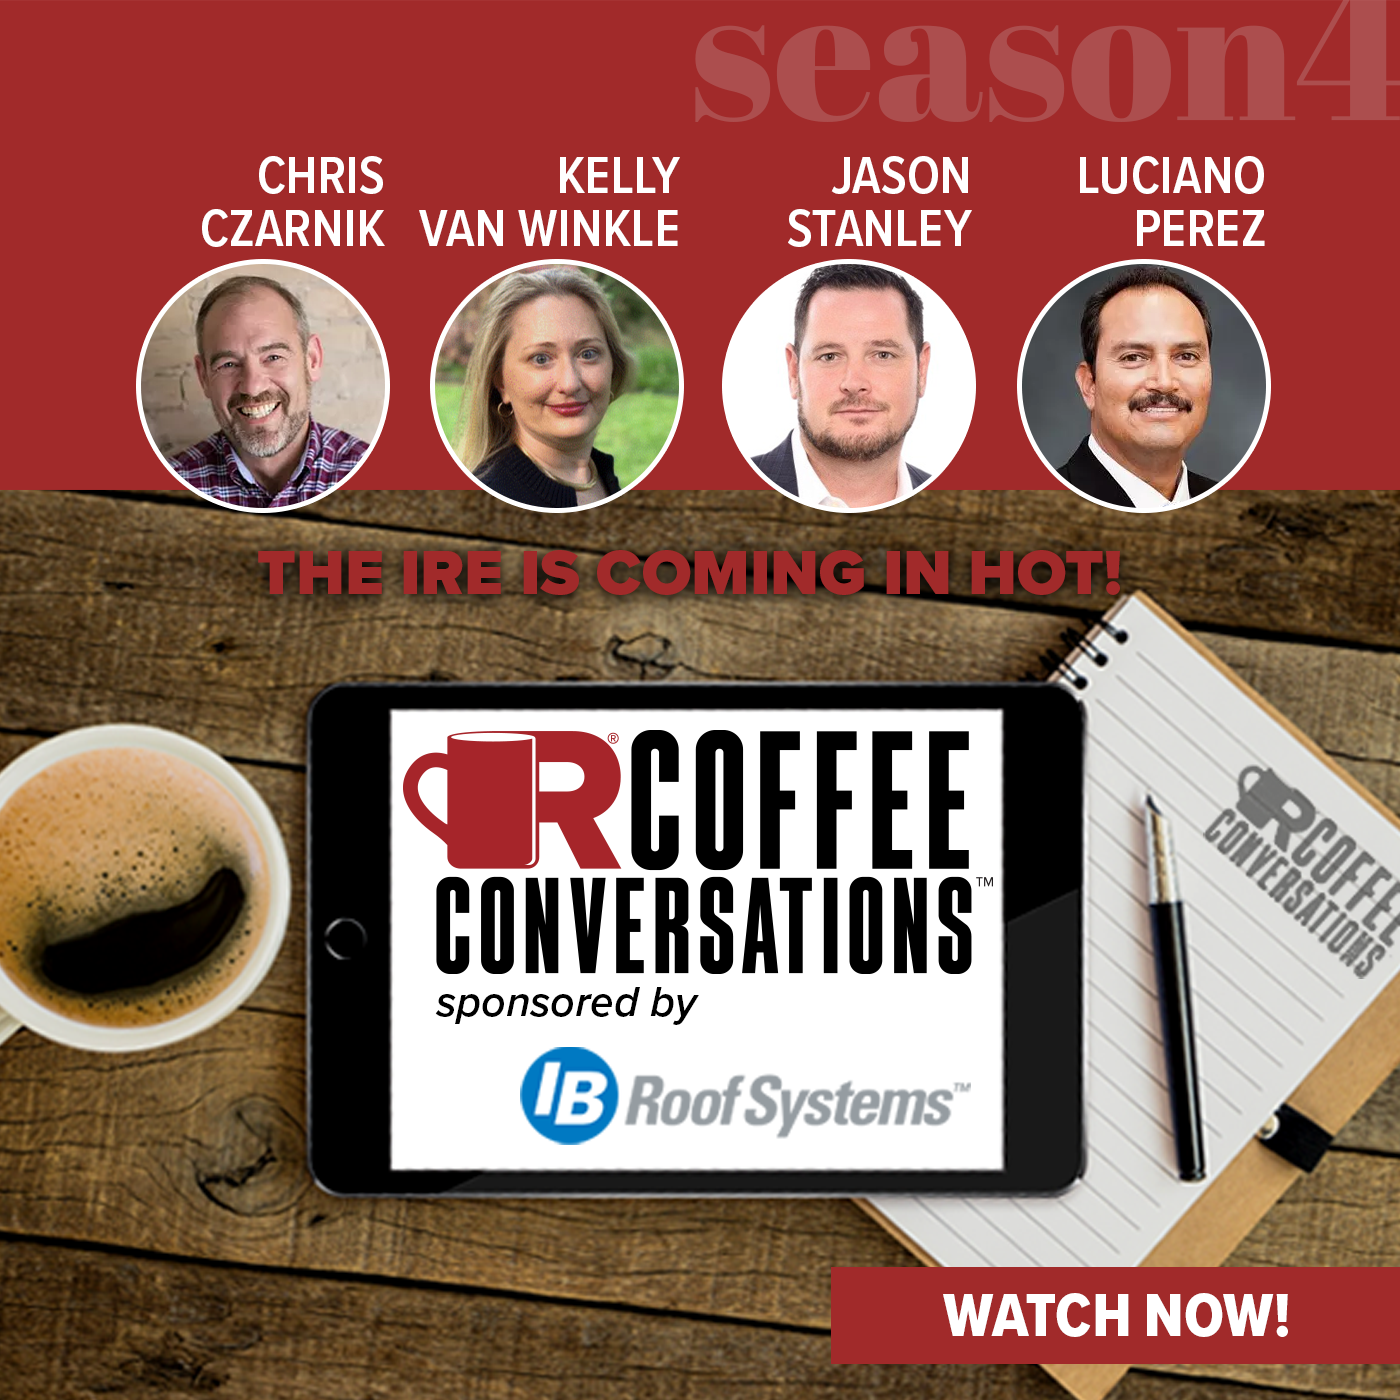 IB Roof - Coffee Conversations - The IRE is Coming in HOT! - POD